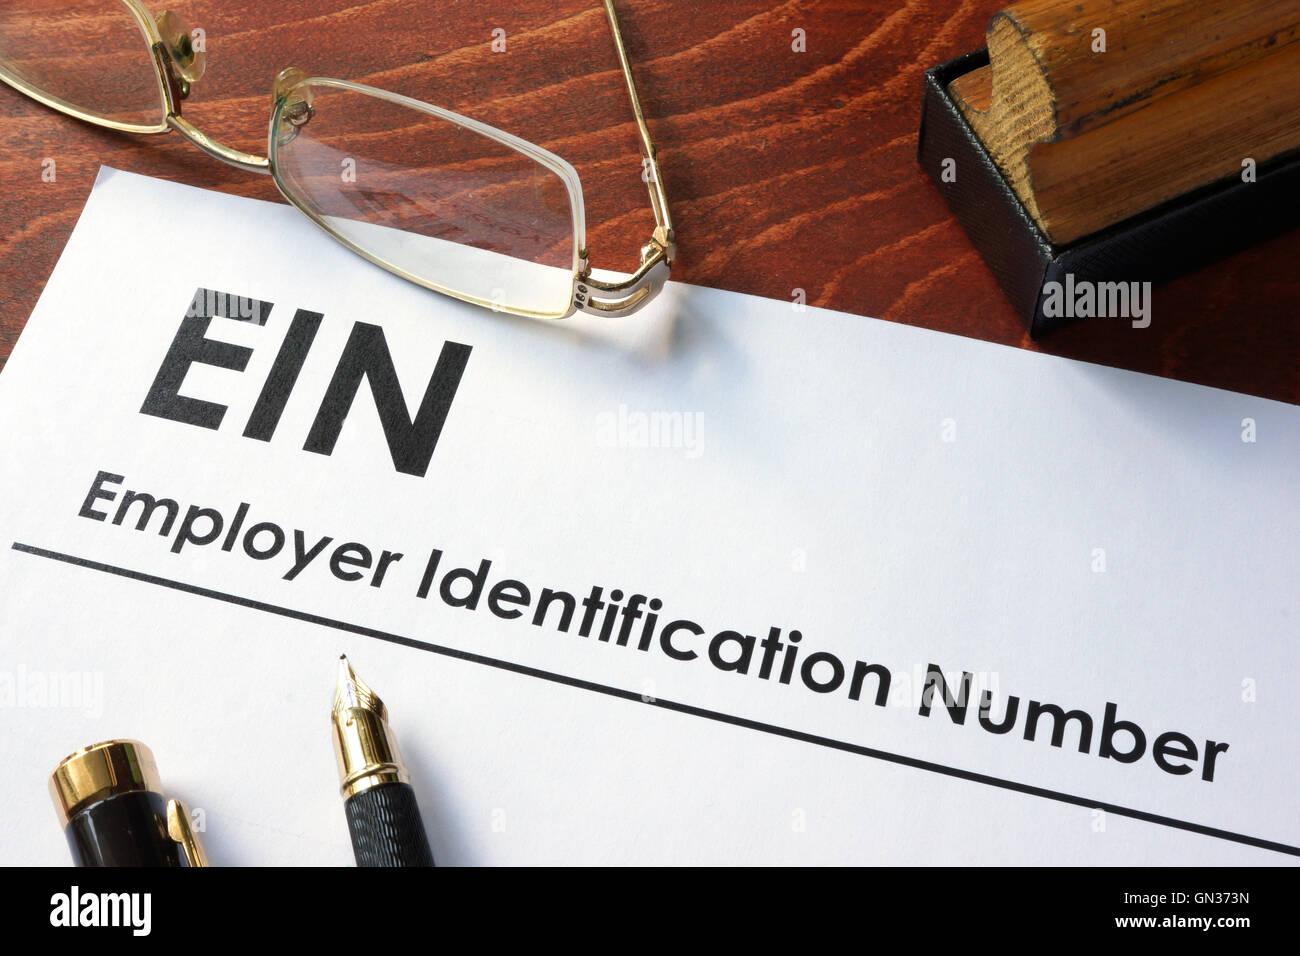 Federal Employer Identification Number (FEIN), also known as an Employer Identification Number (EIN). Stock Photo